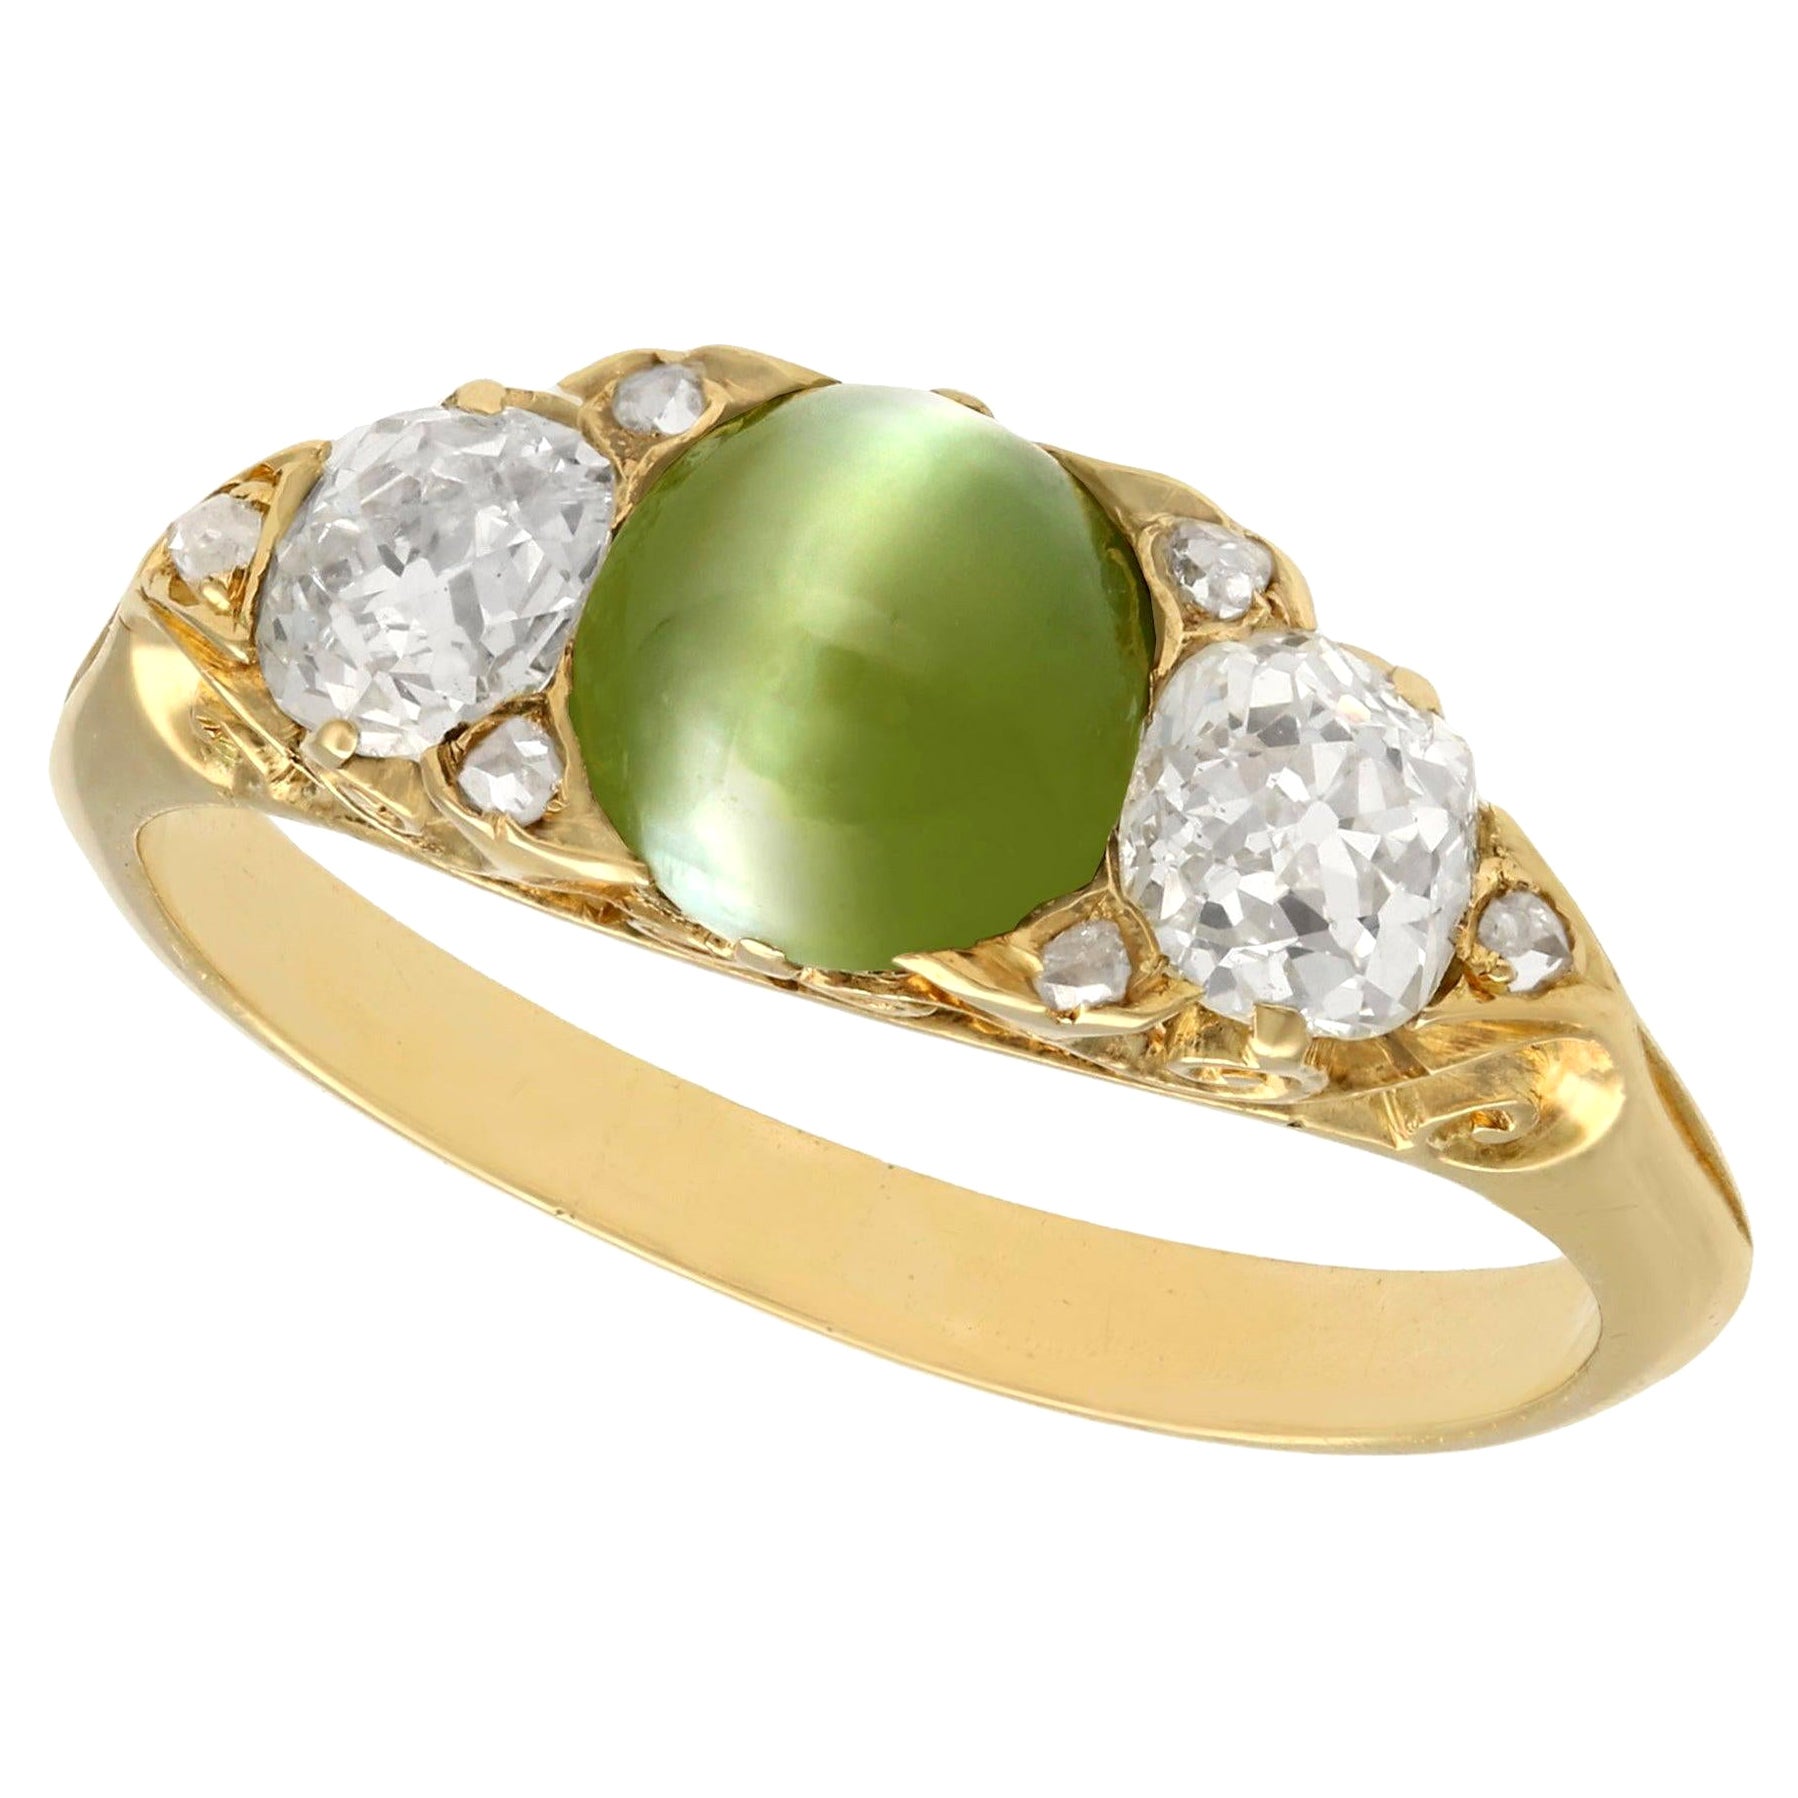 Antique Victorian 1.35 Carat Chrysoberyl and Diamond Yellow Gold Cocktail Ring